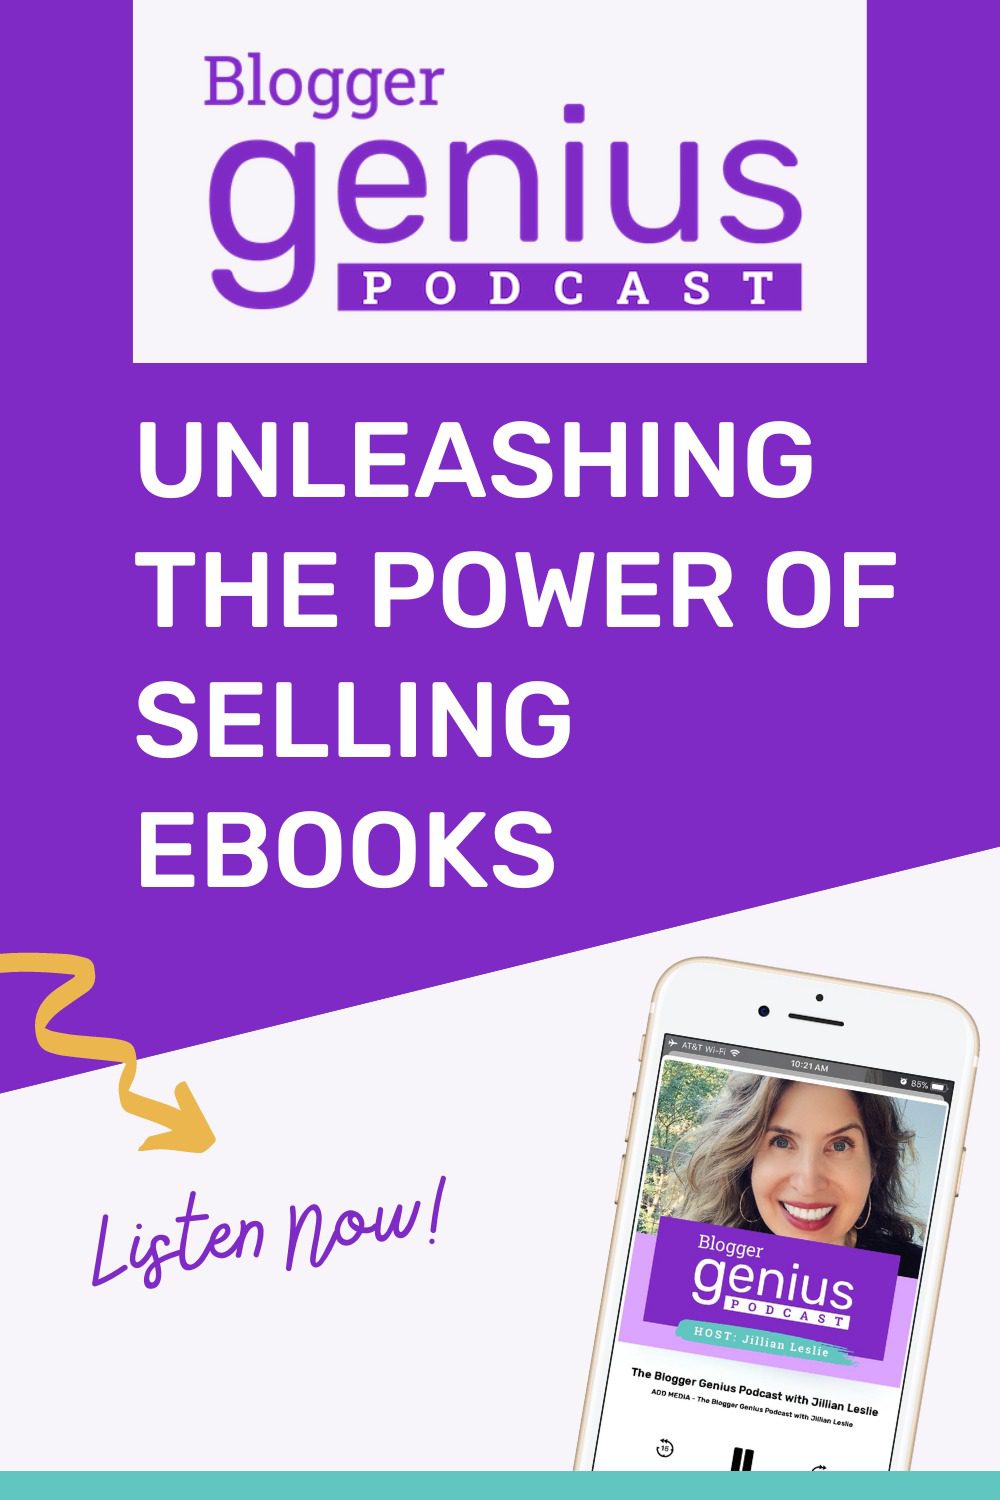 Unleashing the Power of Selling Ebooks: Your Gateway to a Digital Empire | The Blogger Genius Podcast with Jillian Leslie